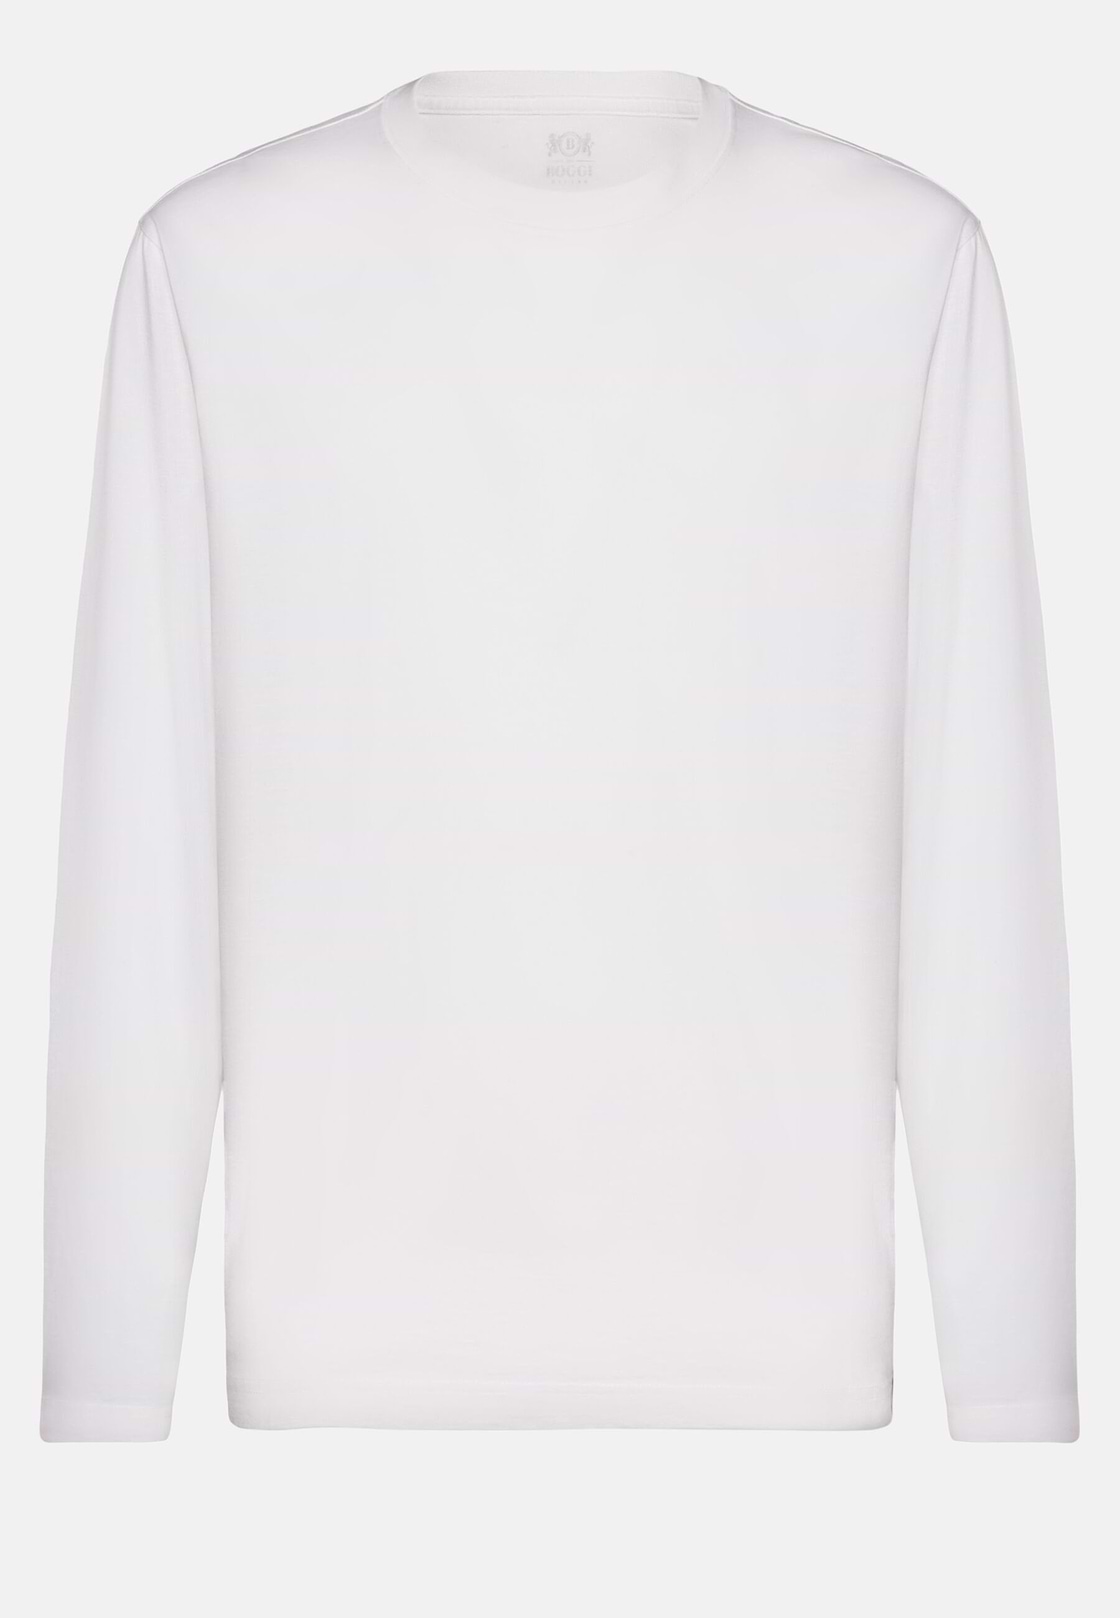 Long-sleeved Pima Cotton Jersey T-shirt, White, hi-res